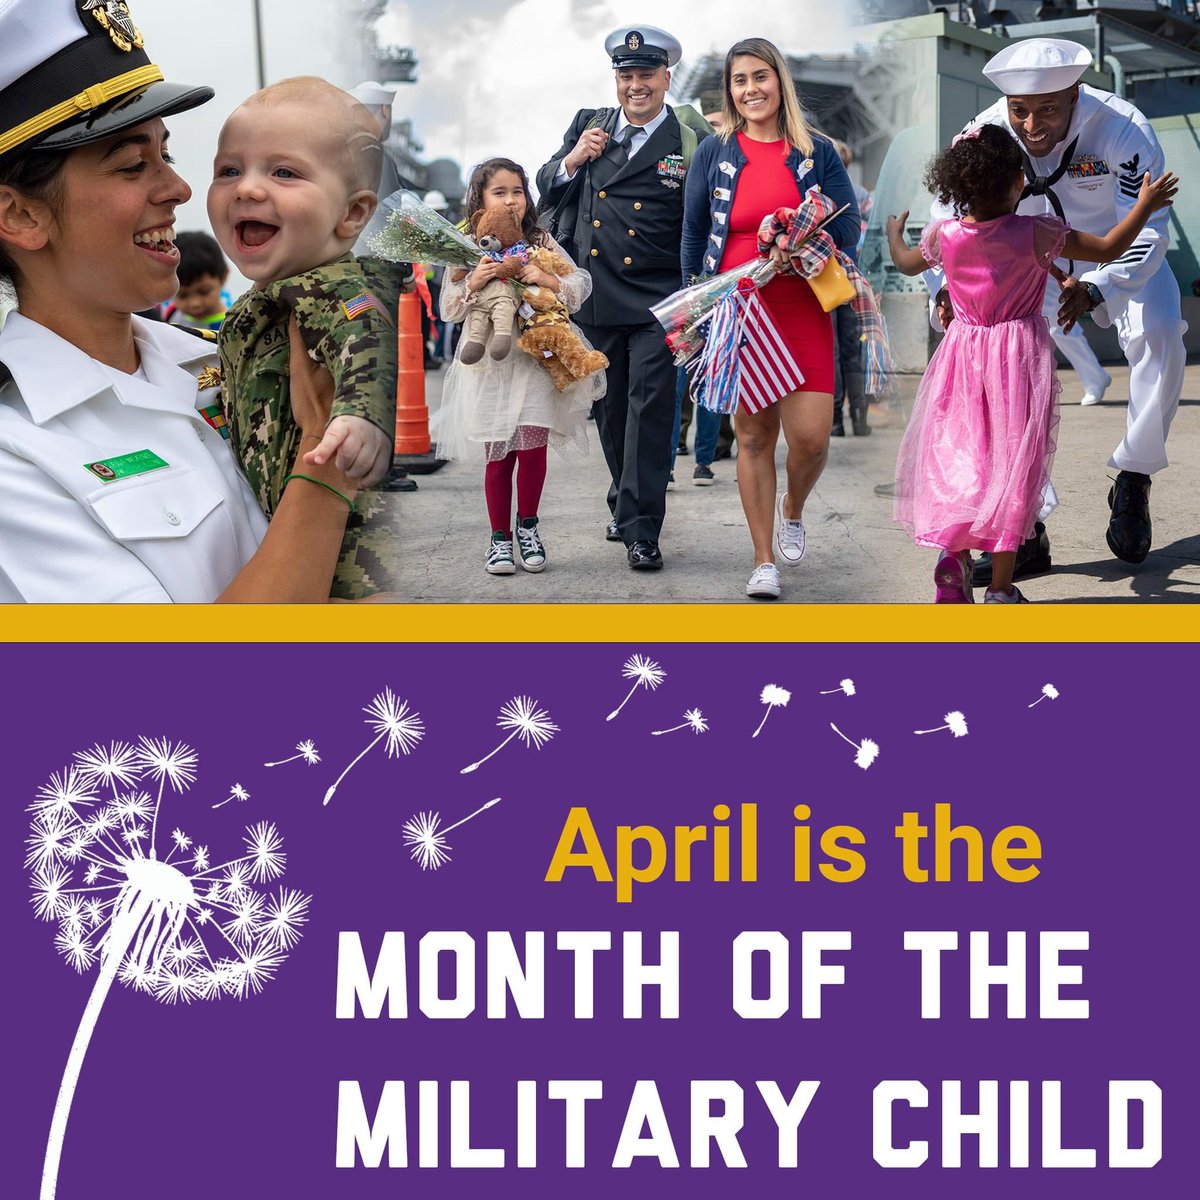 In celebration of #MonthOfTheMilitaryChild, the U.S. Navy applauds the resilience of military children everywhere. From adapting to frequent moves and dealing with family separations during deployment, they are some of the most adaptable and strong members of our Navy family. We…